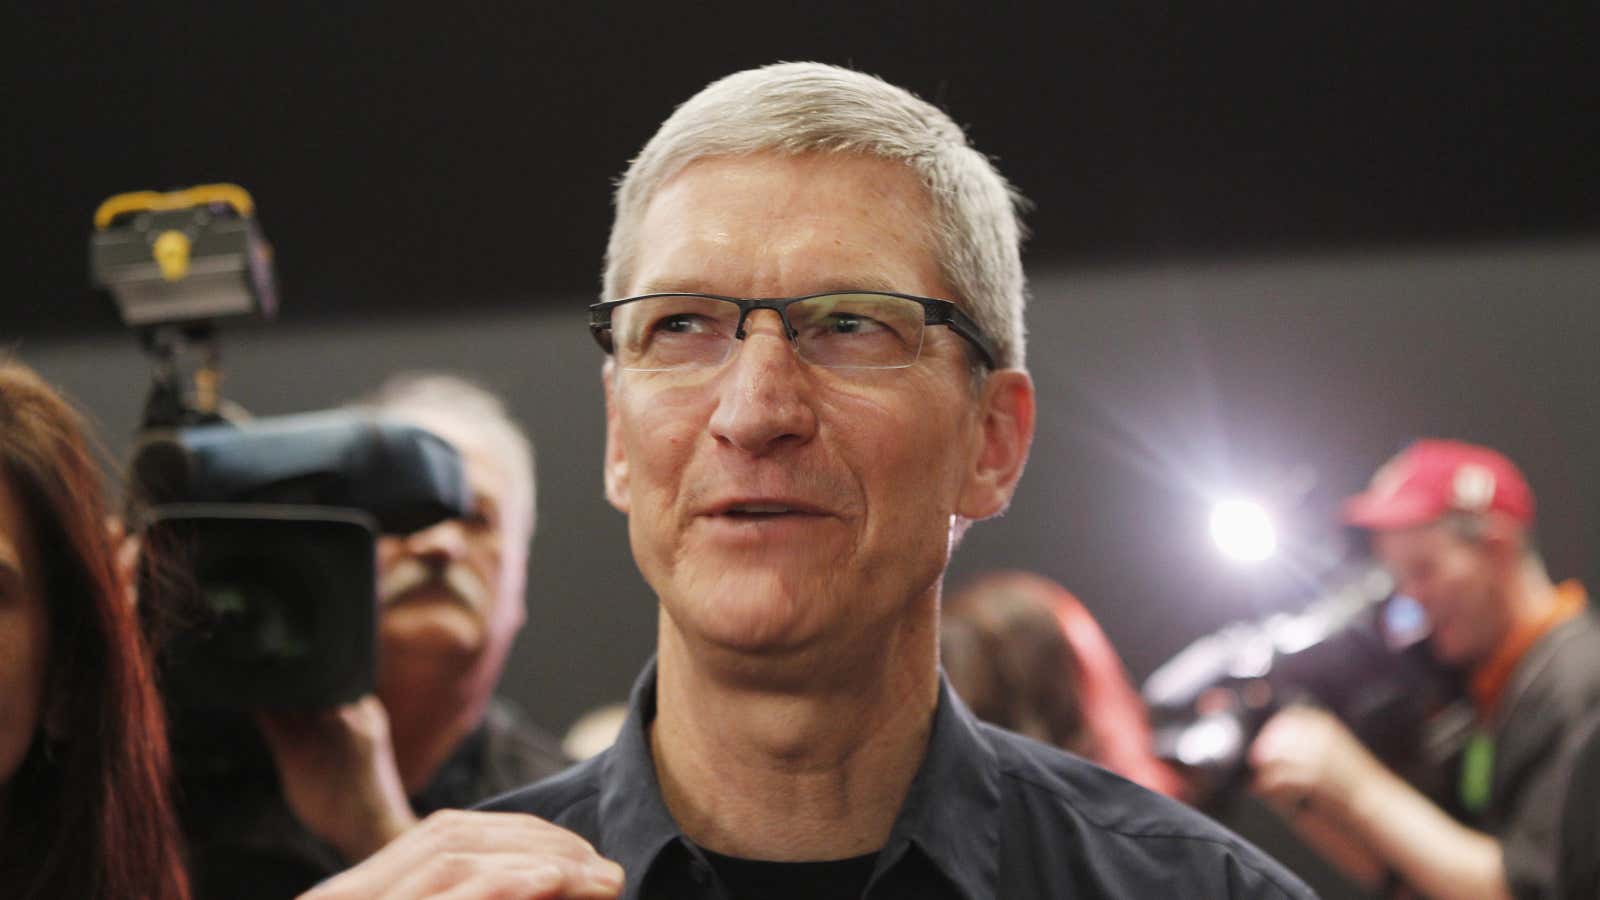 Tim Cook’s Apple is about to have its biggest day yet.